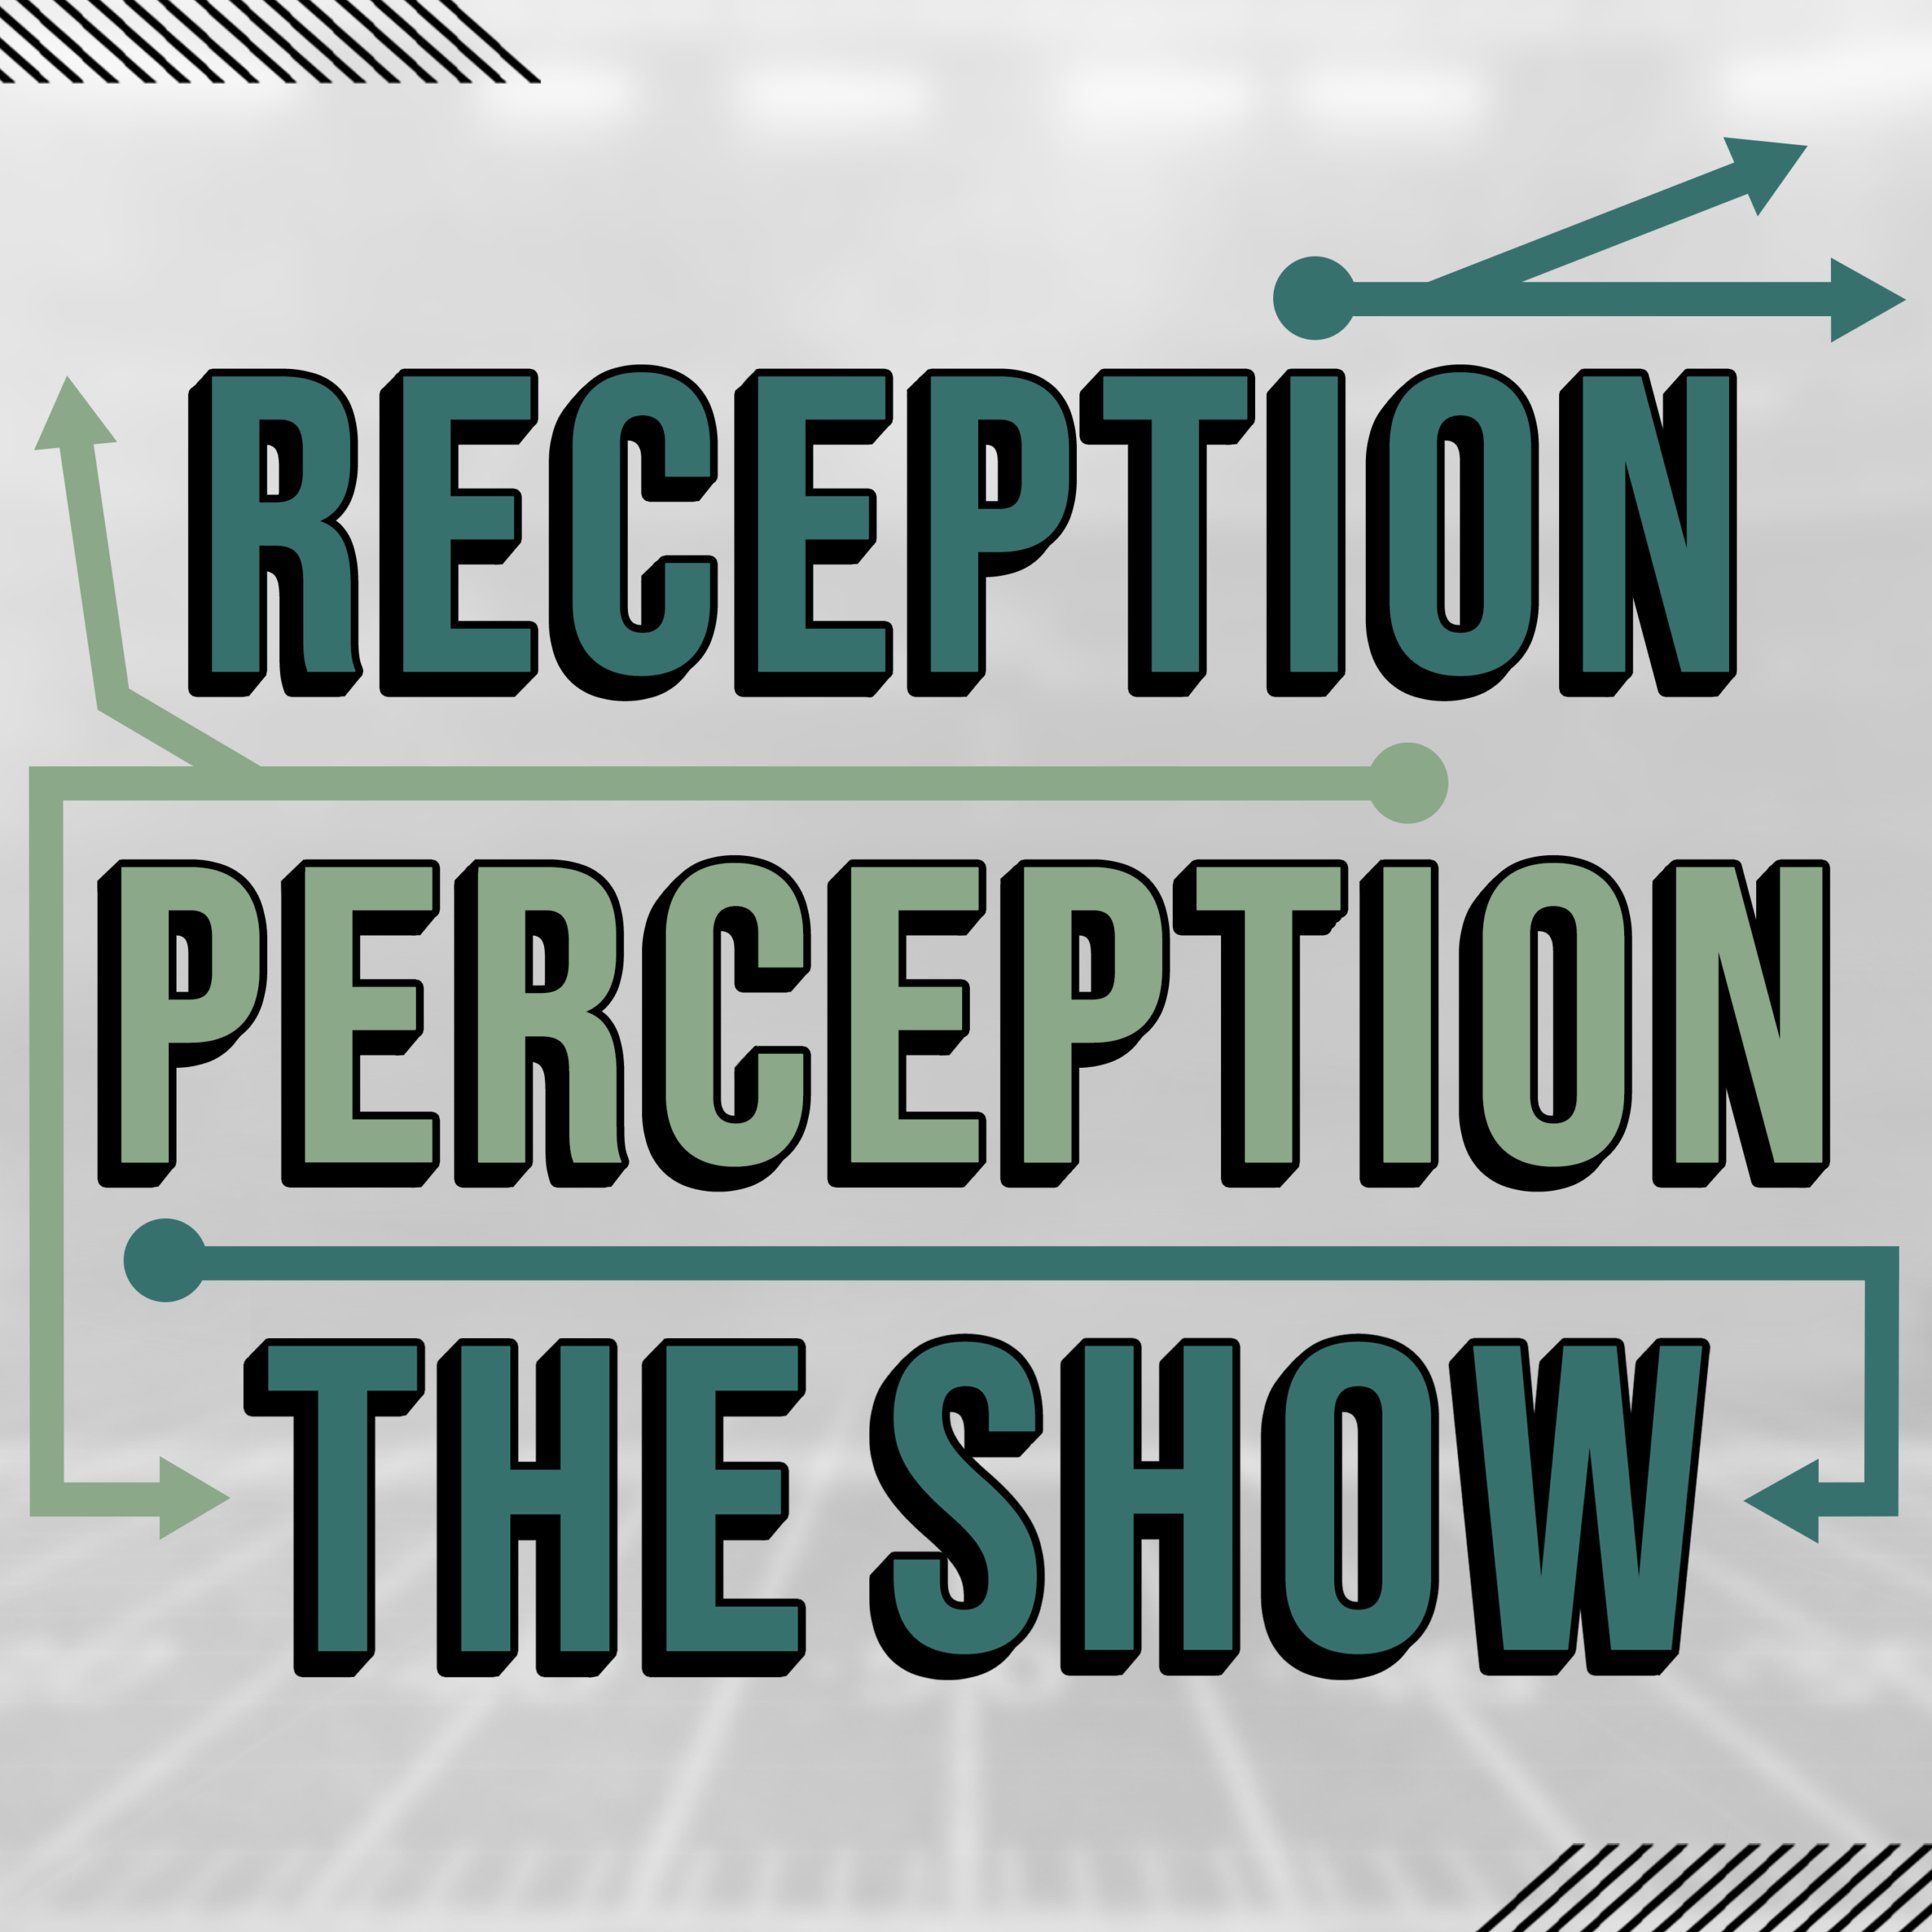 Reception Perception The Show – Rookies, Returns, and the New Look New York Giants